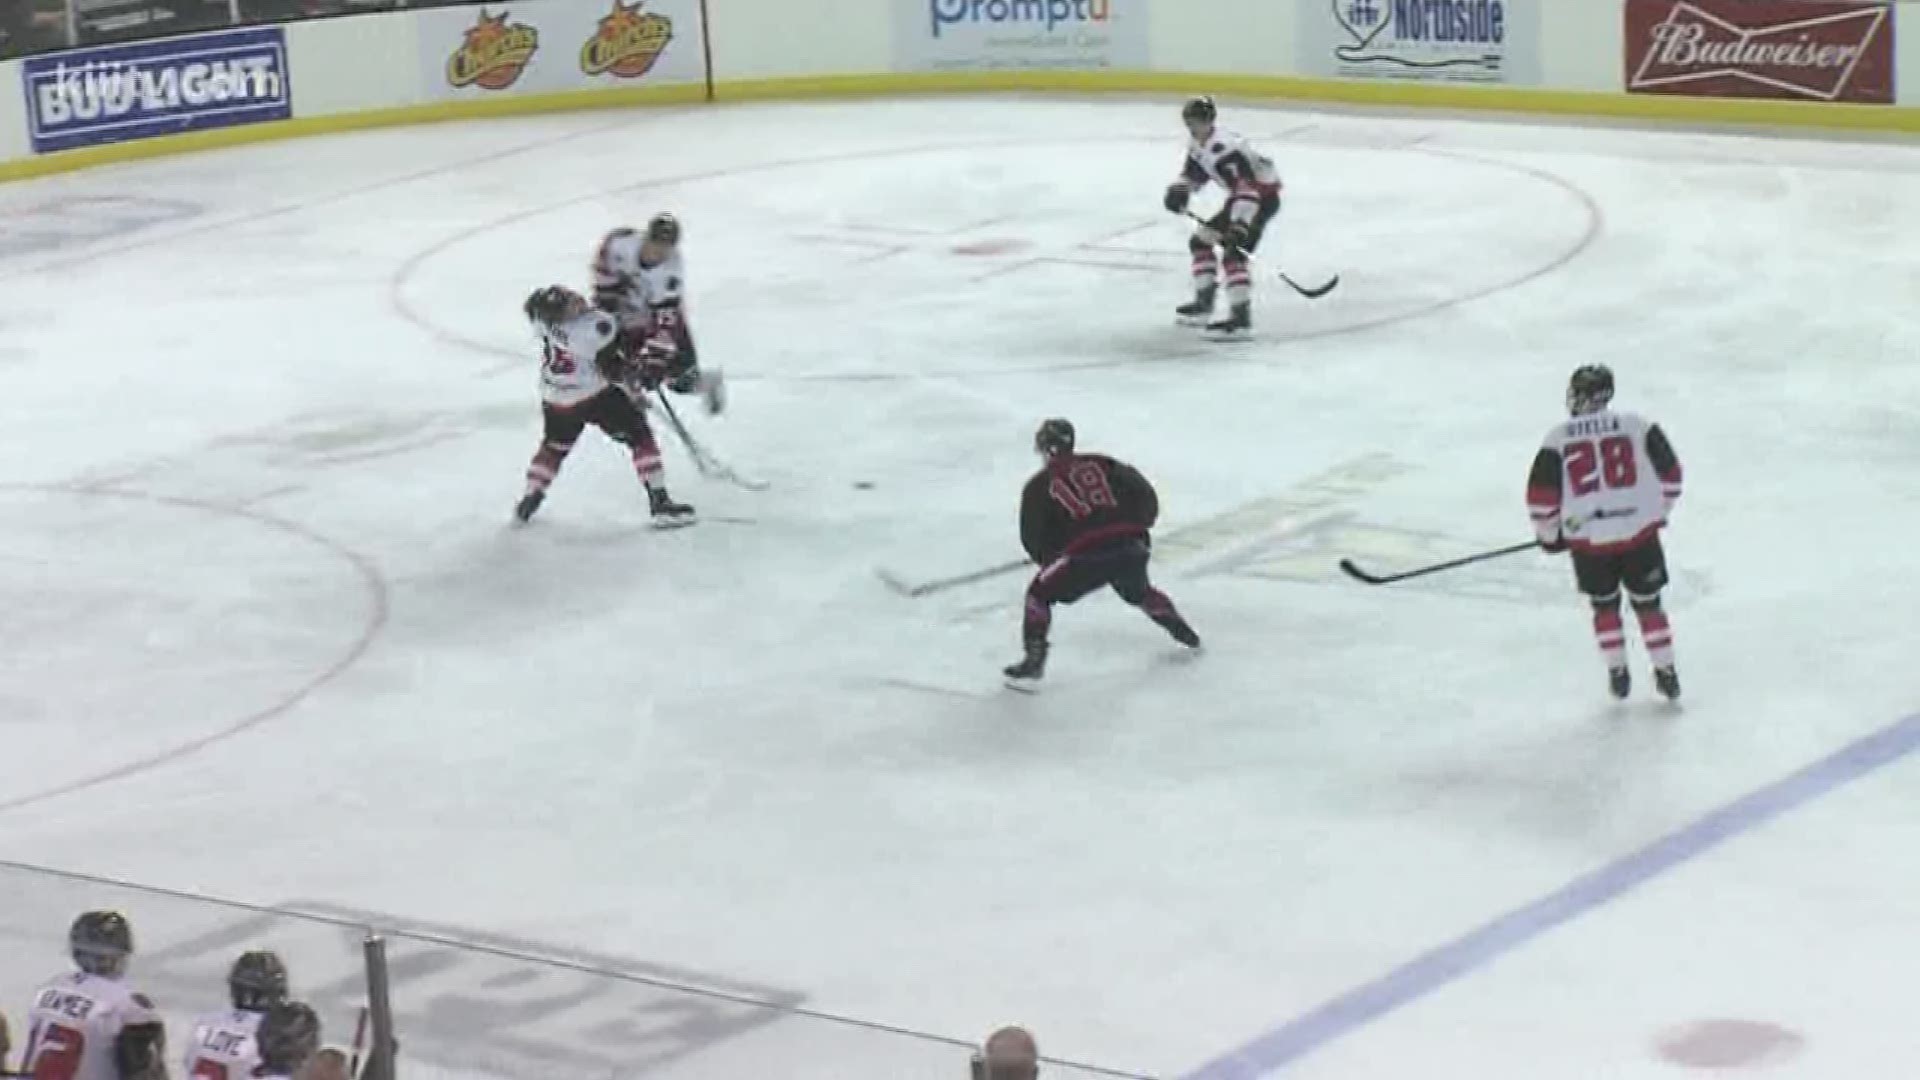 The Corpus Christi IceRays dropped to 23-23 on the season with a 6-2 loss to the Odessa Jackalopes.